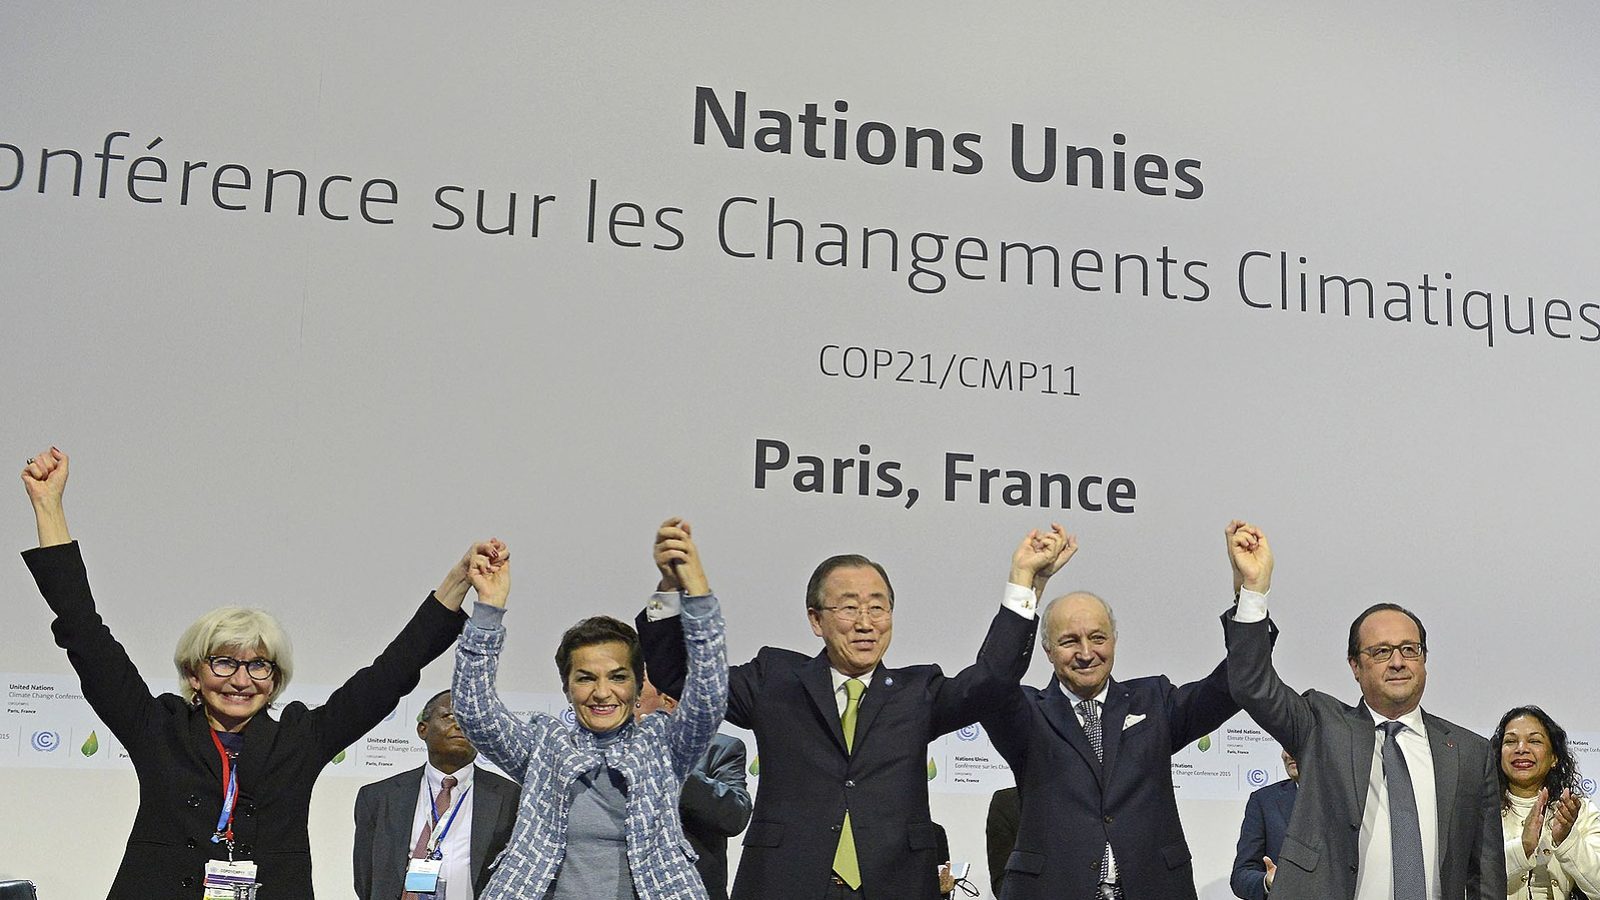 Participants of the plenary session of the COP21 for the adoption of the Paris Accord celebrate